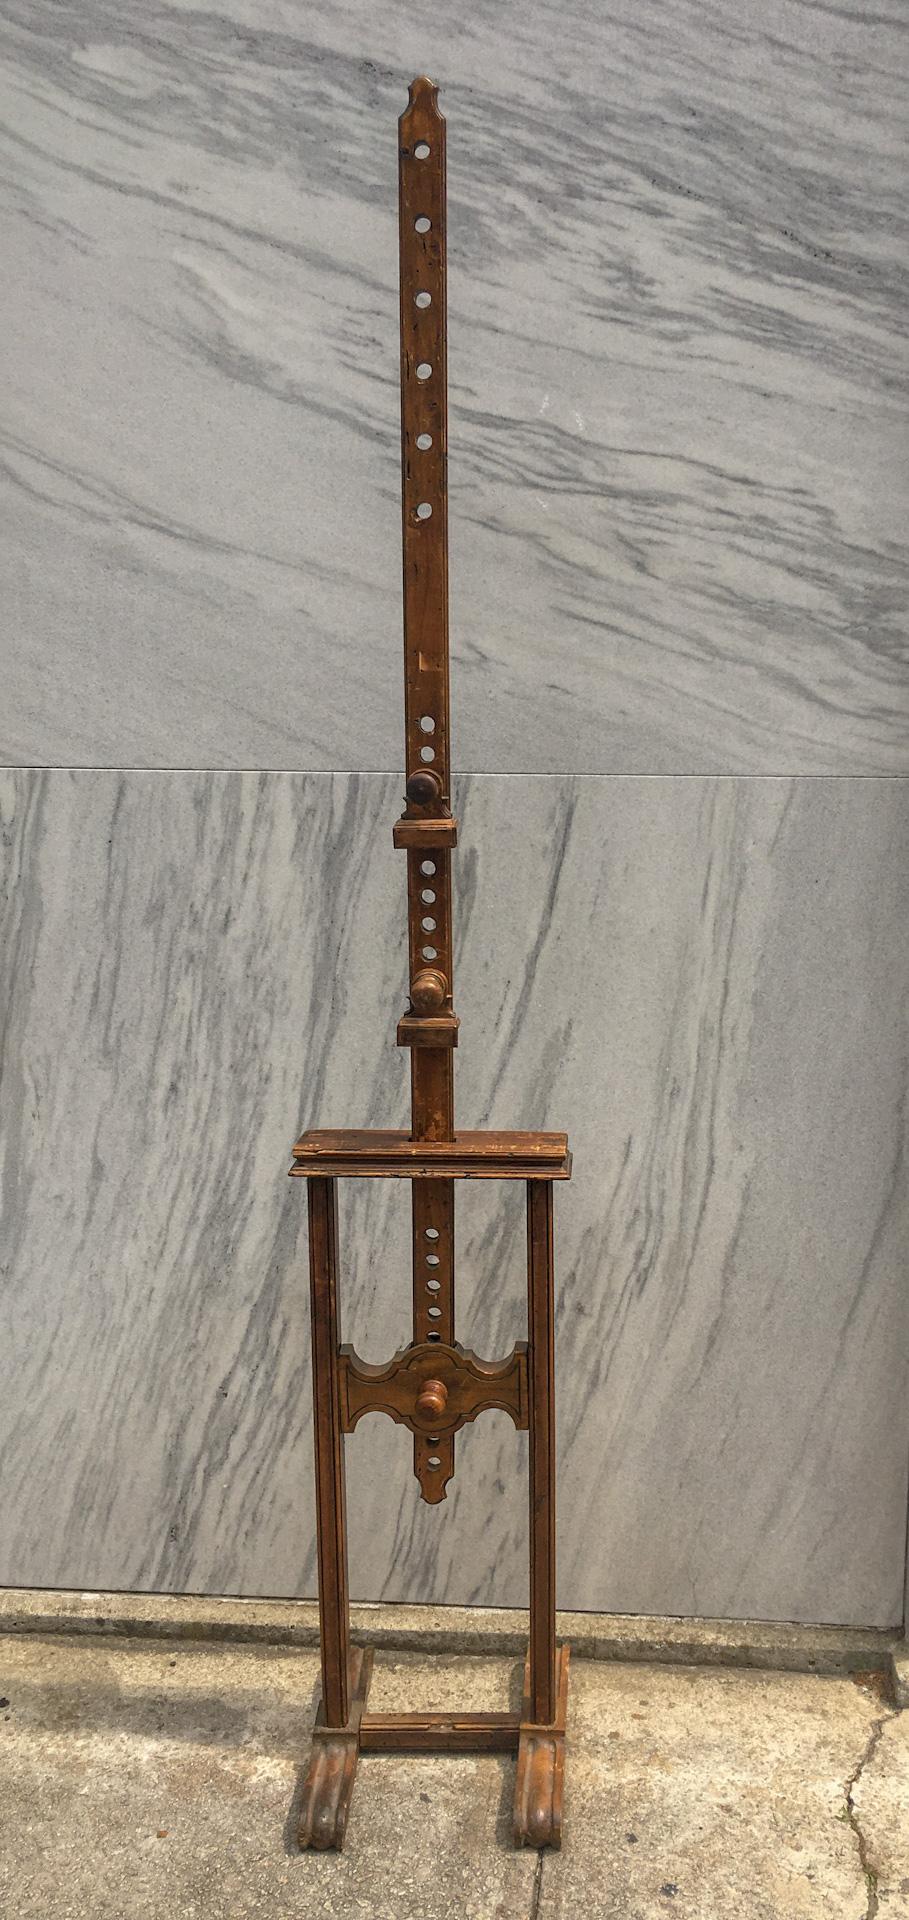 This well used antique fruitwood artist’s easel features an adjustable twenty-four hole mechanism and is raised up on a trestle base terminating in rounded fluted double feet on either side. Well-worn but sturdy with nice old patina. 